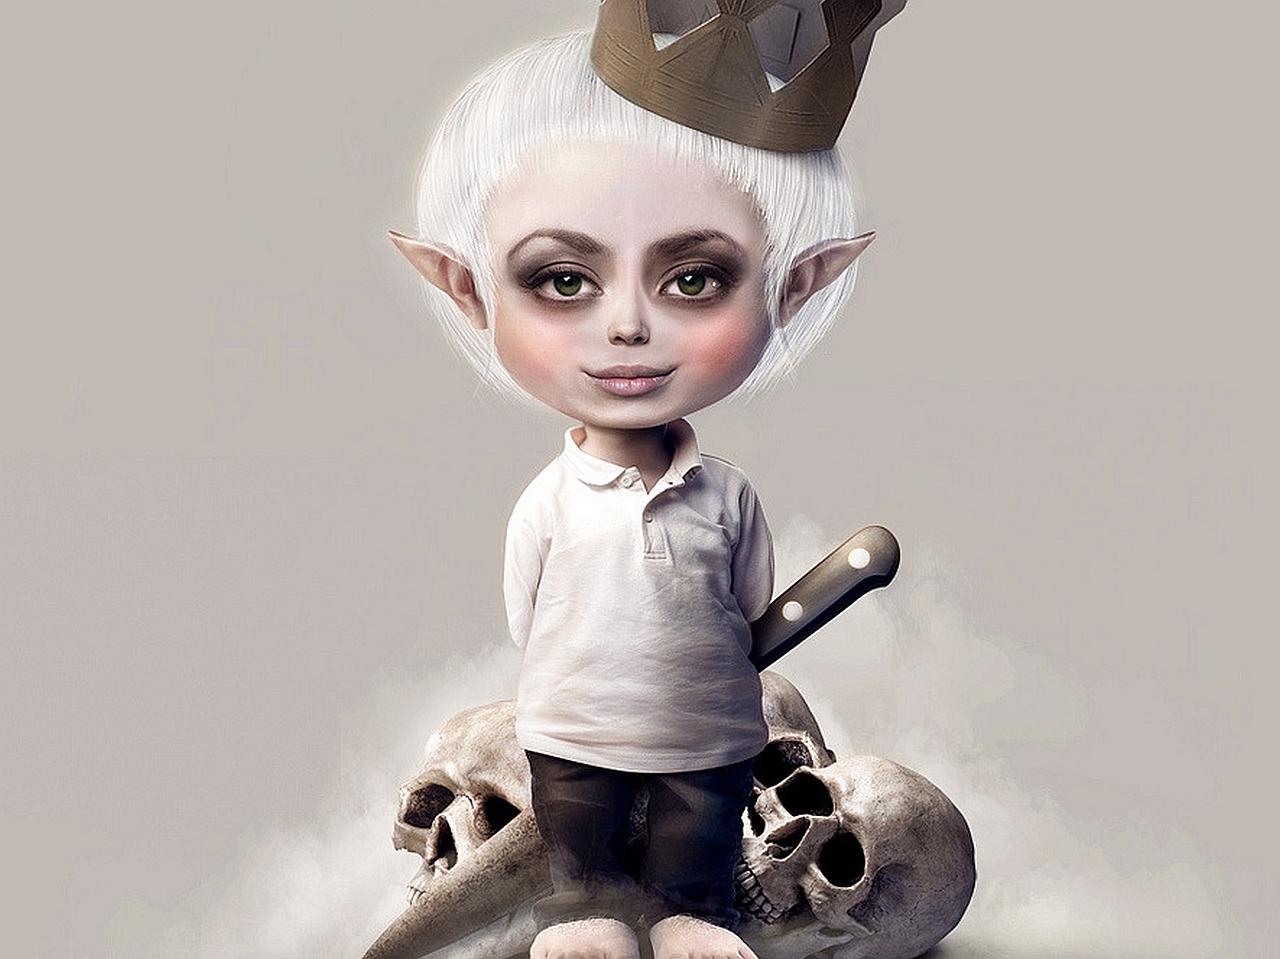 Fantasy gnome Picture by Joonas Paloheimo